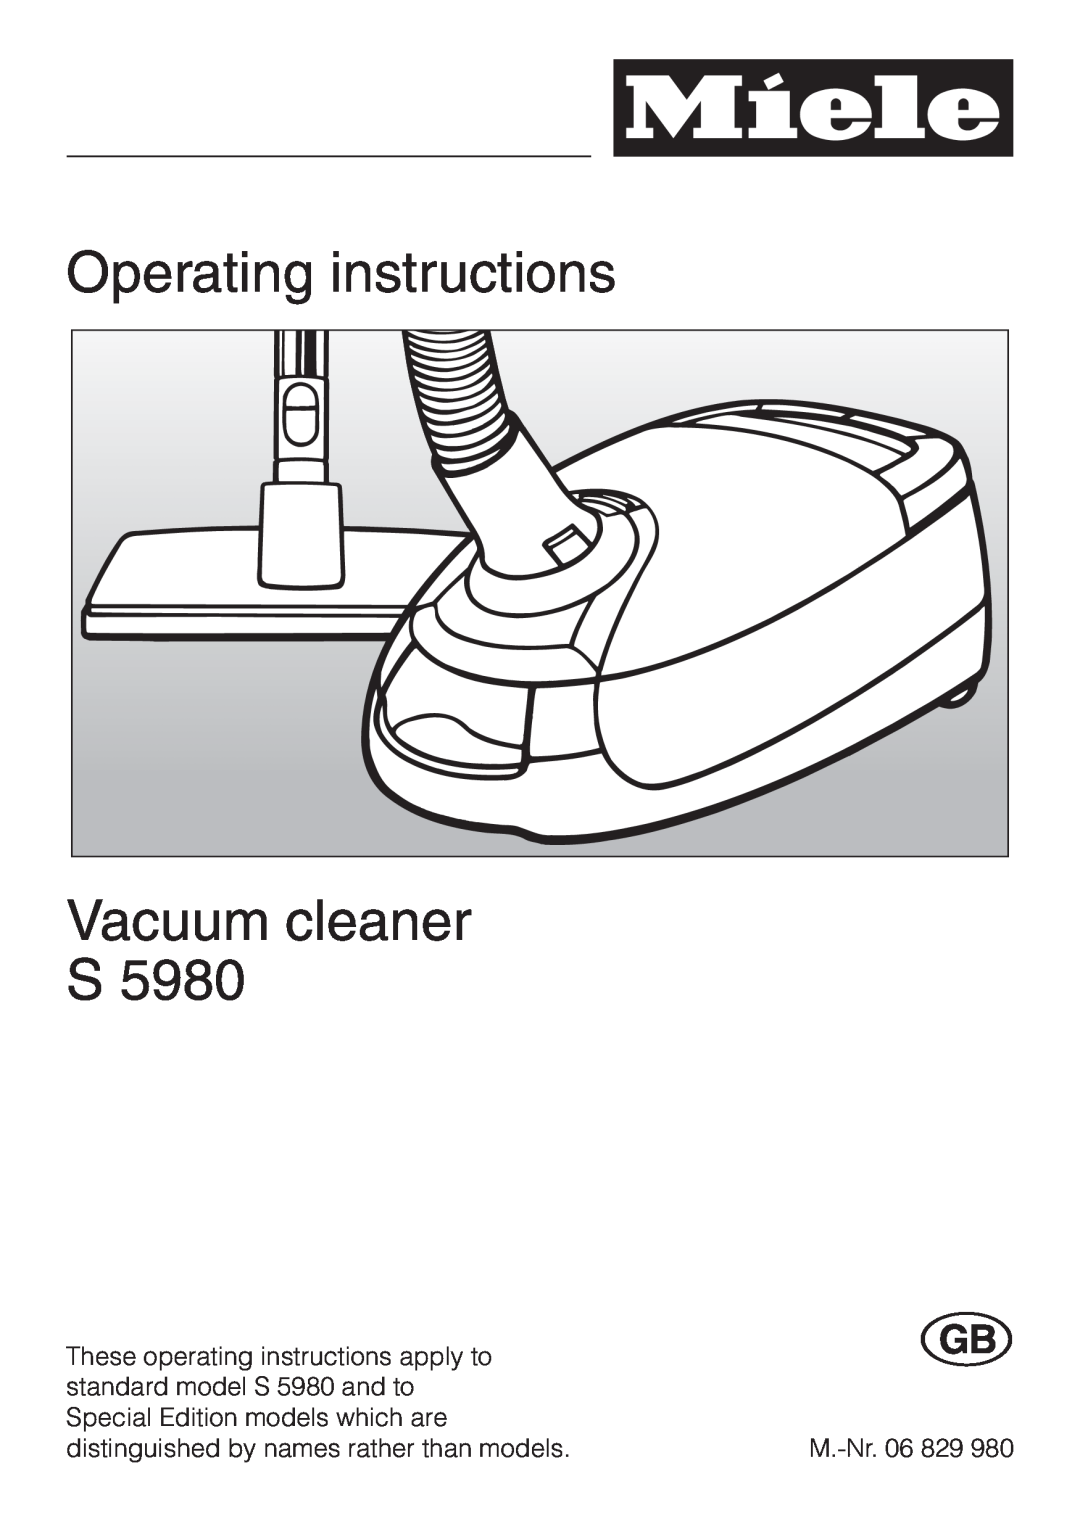 Miele S 5980 operating instructions Operating instructions Vacuum cleaner S, en - US, CA 